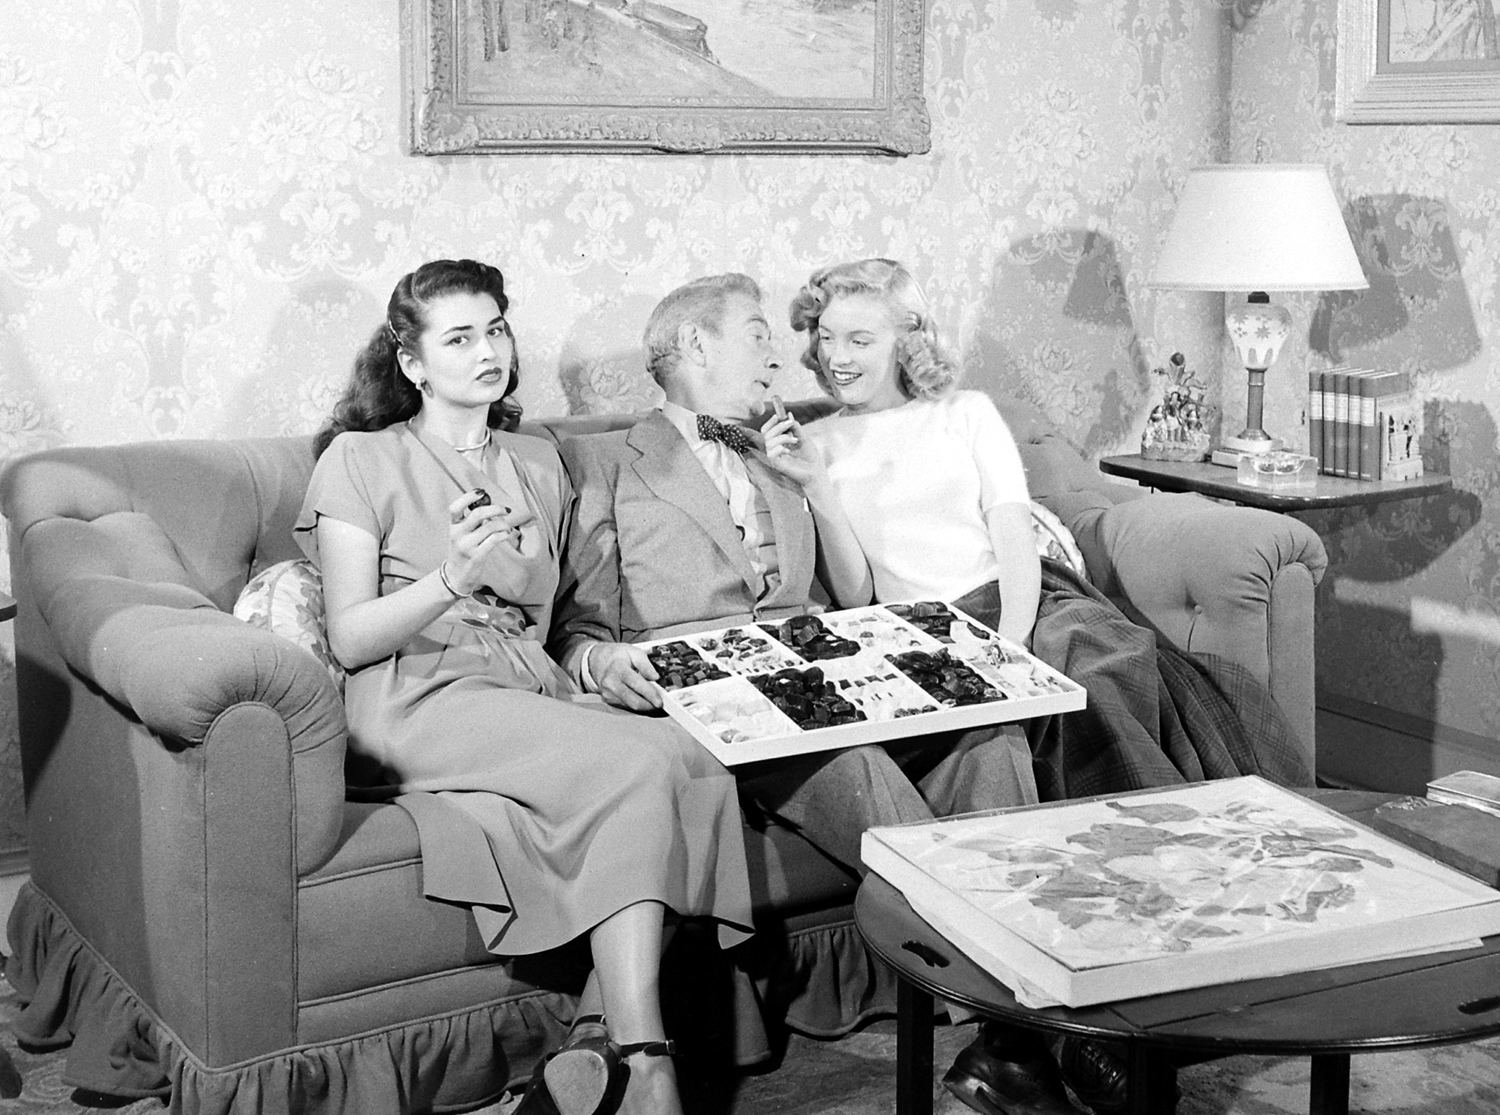 Then-unknown actress Marilyn Monroe with Clifton Webb and Laurette Luez on the set of a 1948 comedy, "Sitting Pretty."